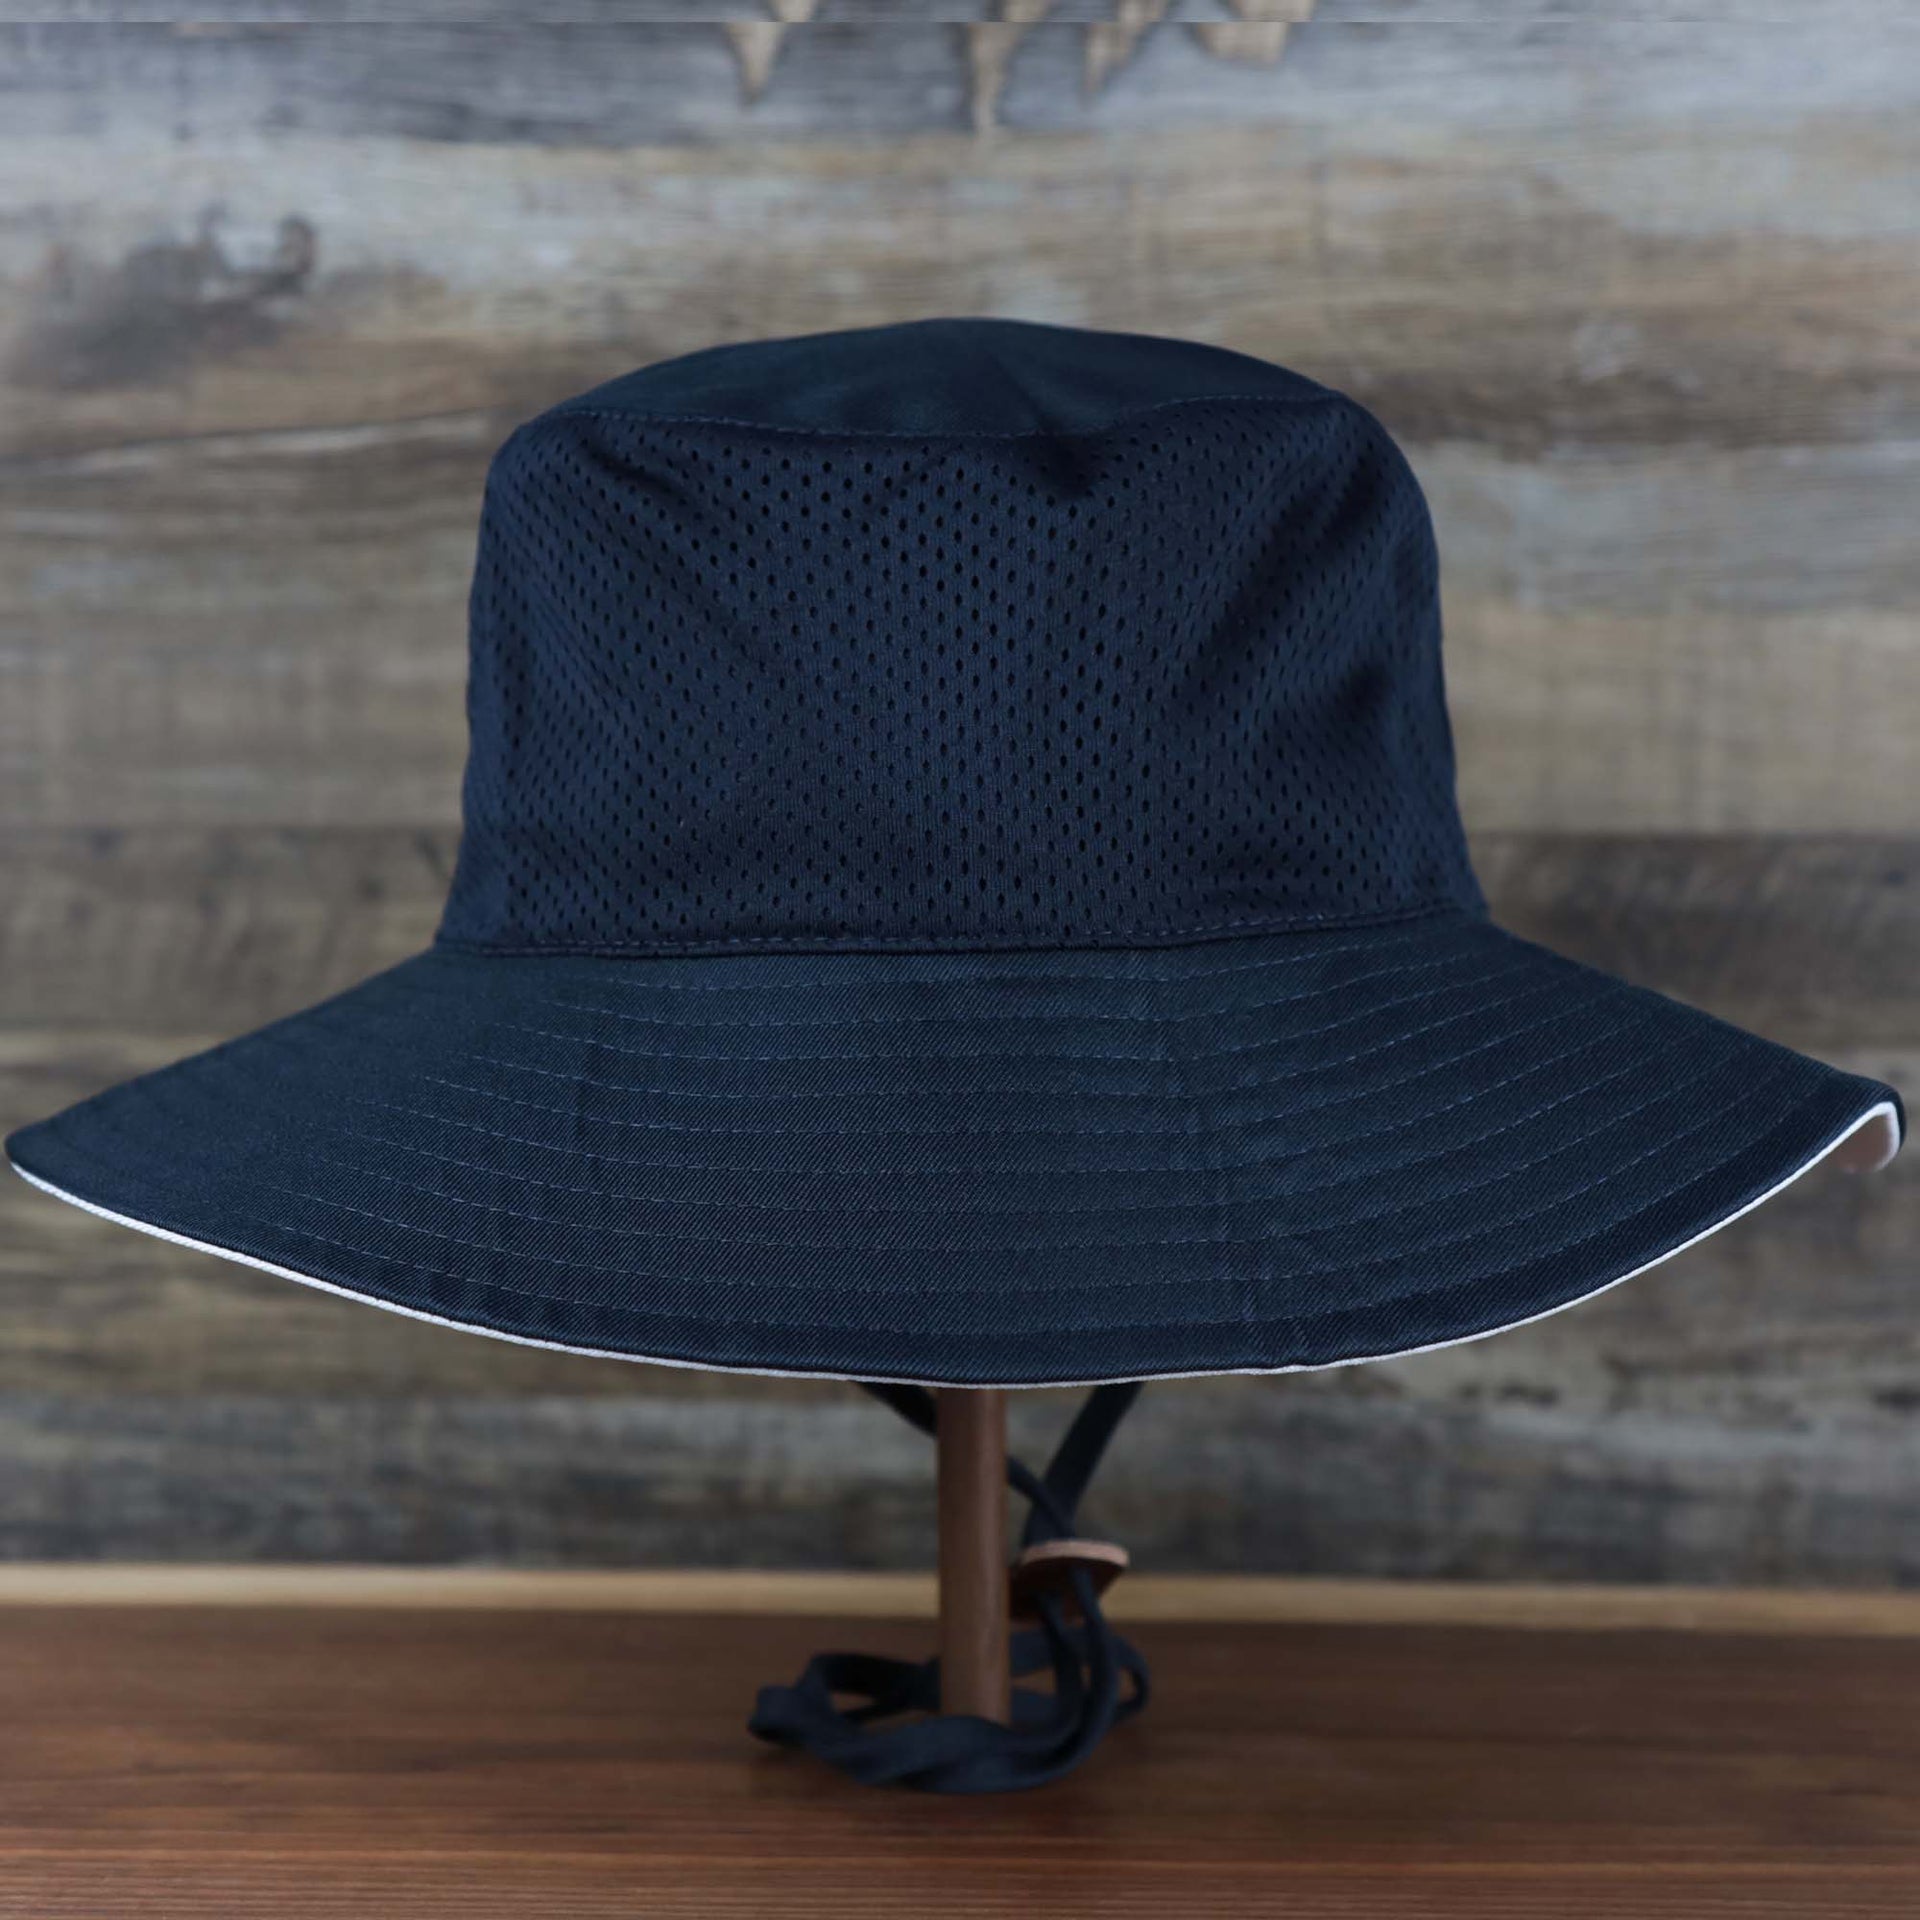 The backside of the New York Yankees Panama Pail Bucket Hat | 47 Brand, Navy